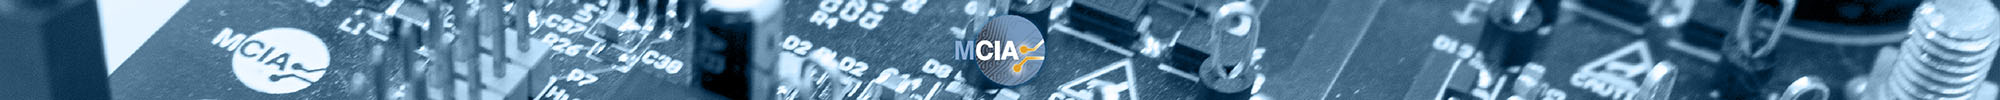 Center Innovation Electronics. Motion Control and Industrial Applications. MCIA